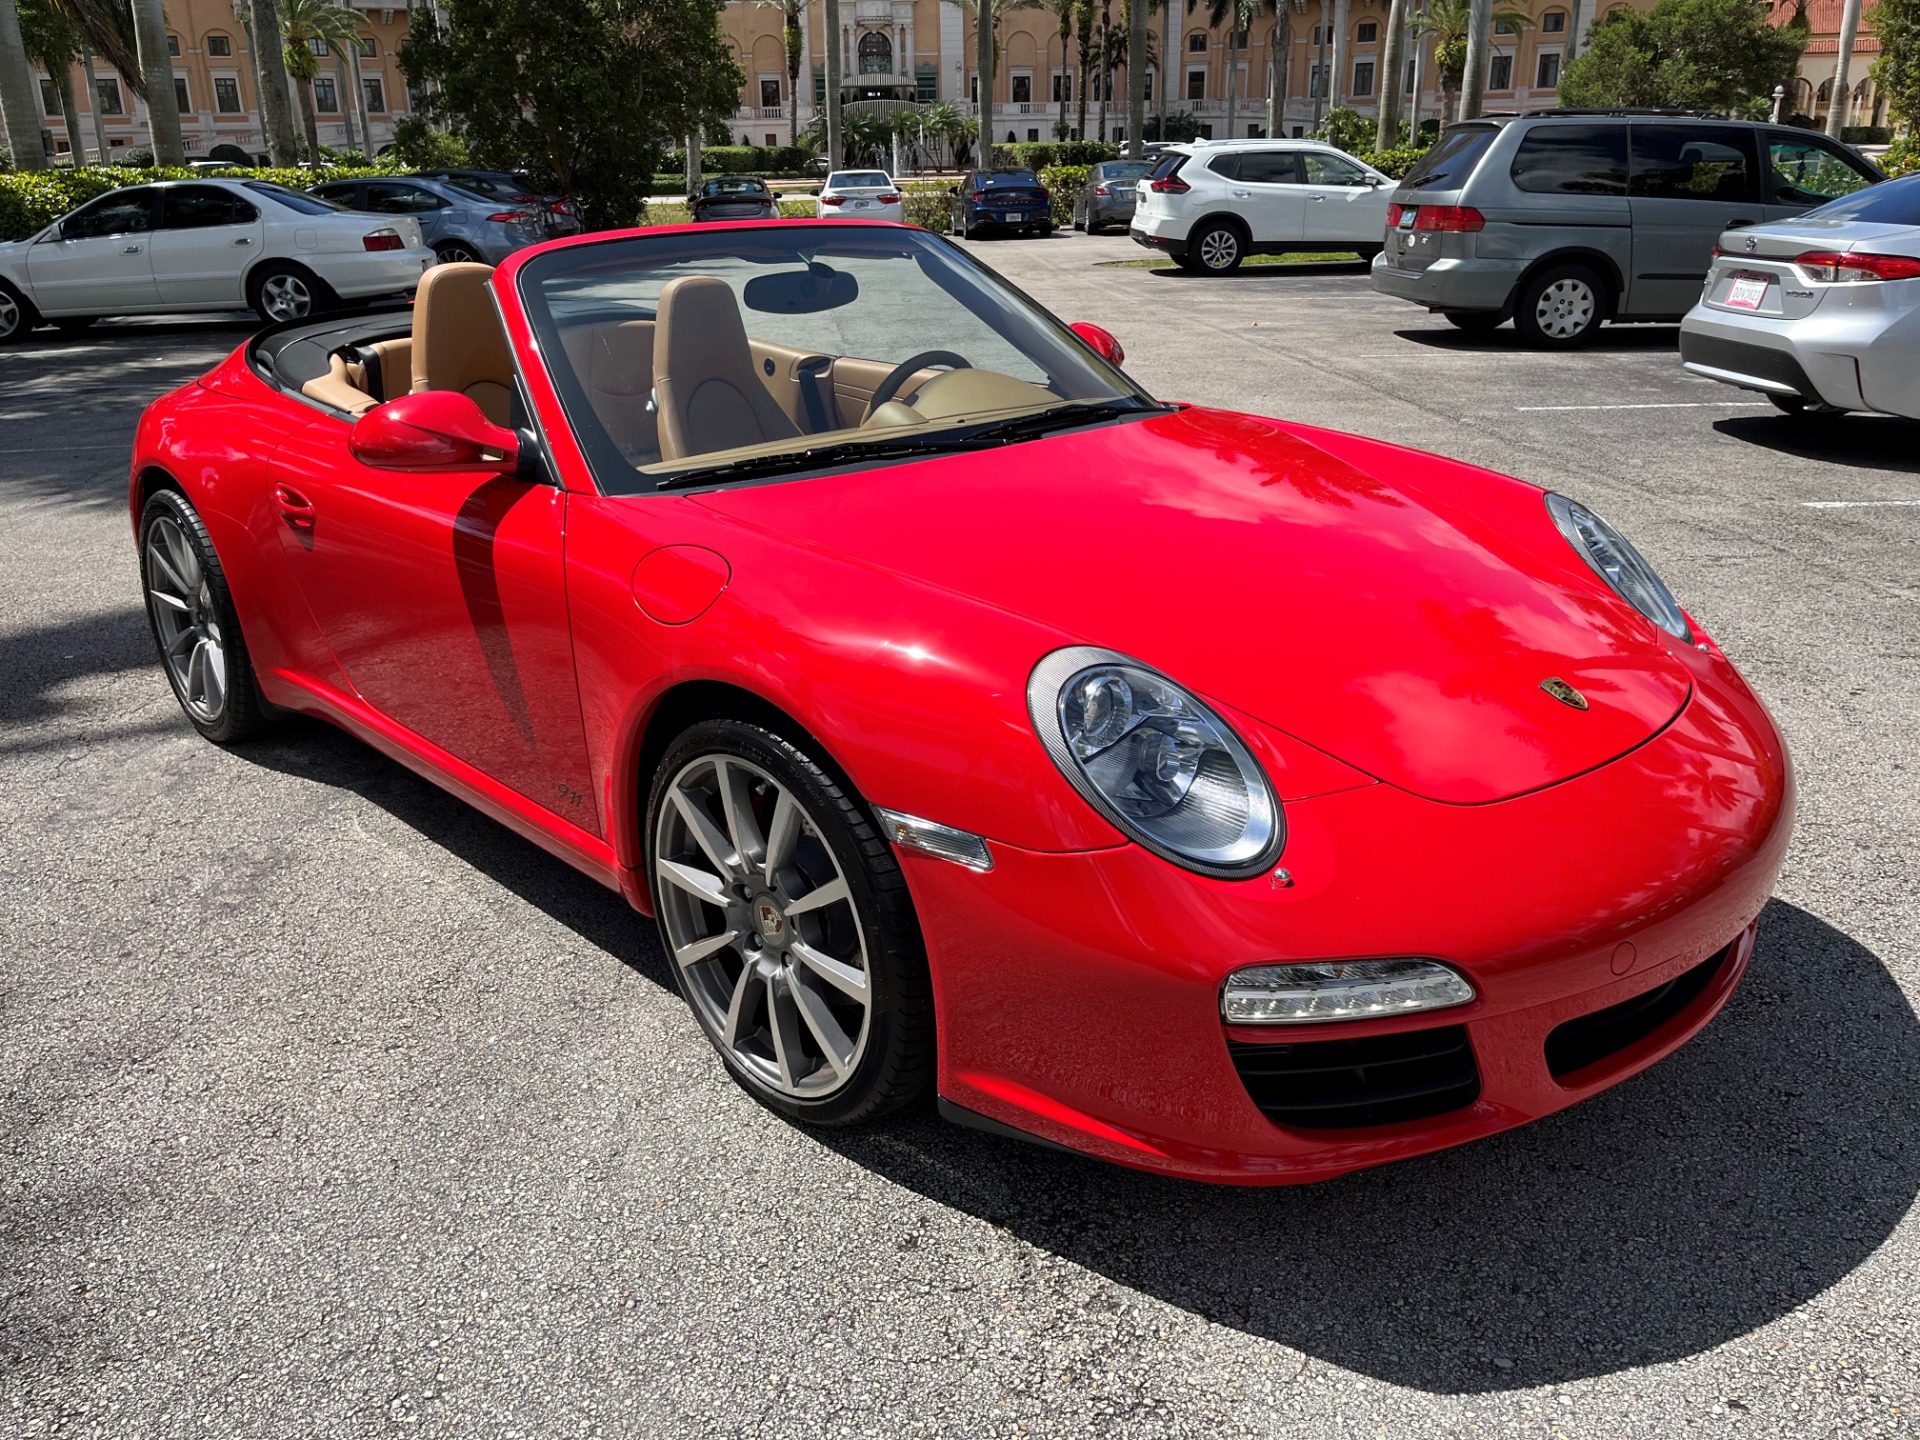 Used 2012 Porsche 911 Carrera for sale Sold at The Gables Sports Cars in Miami FL 33146 3